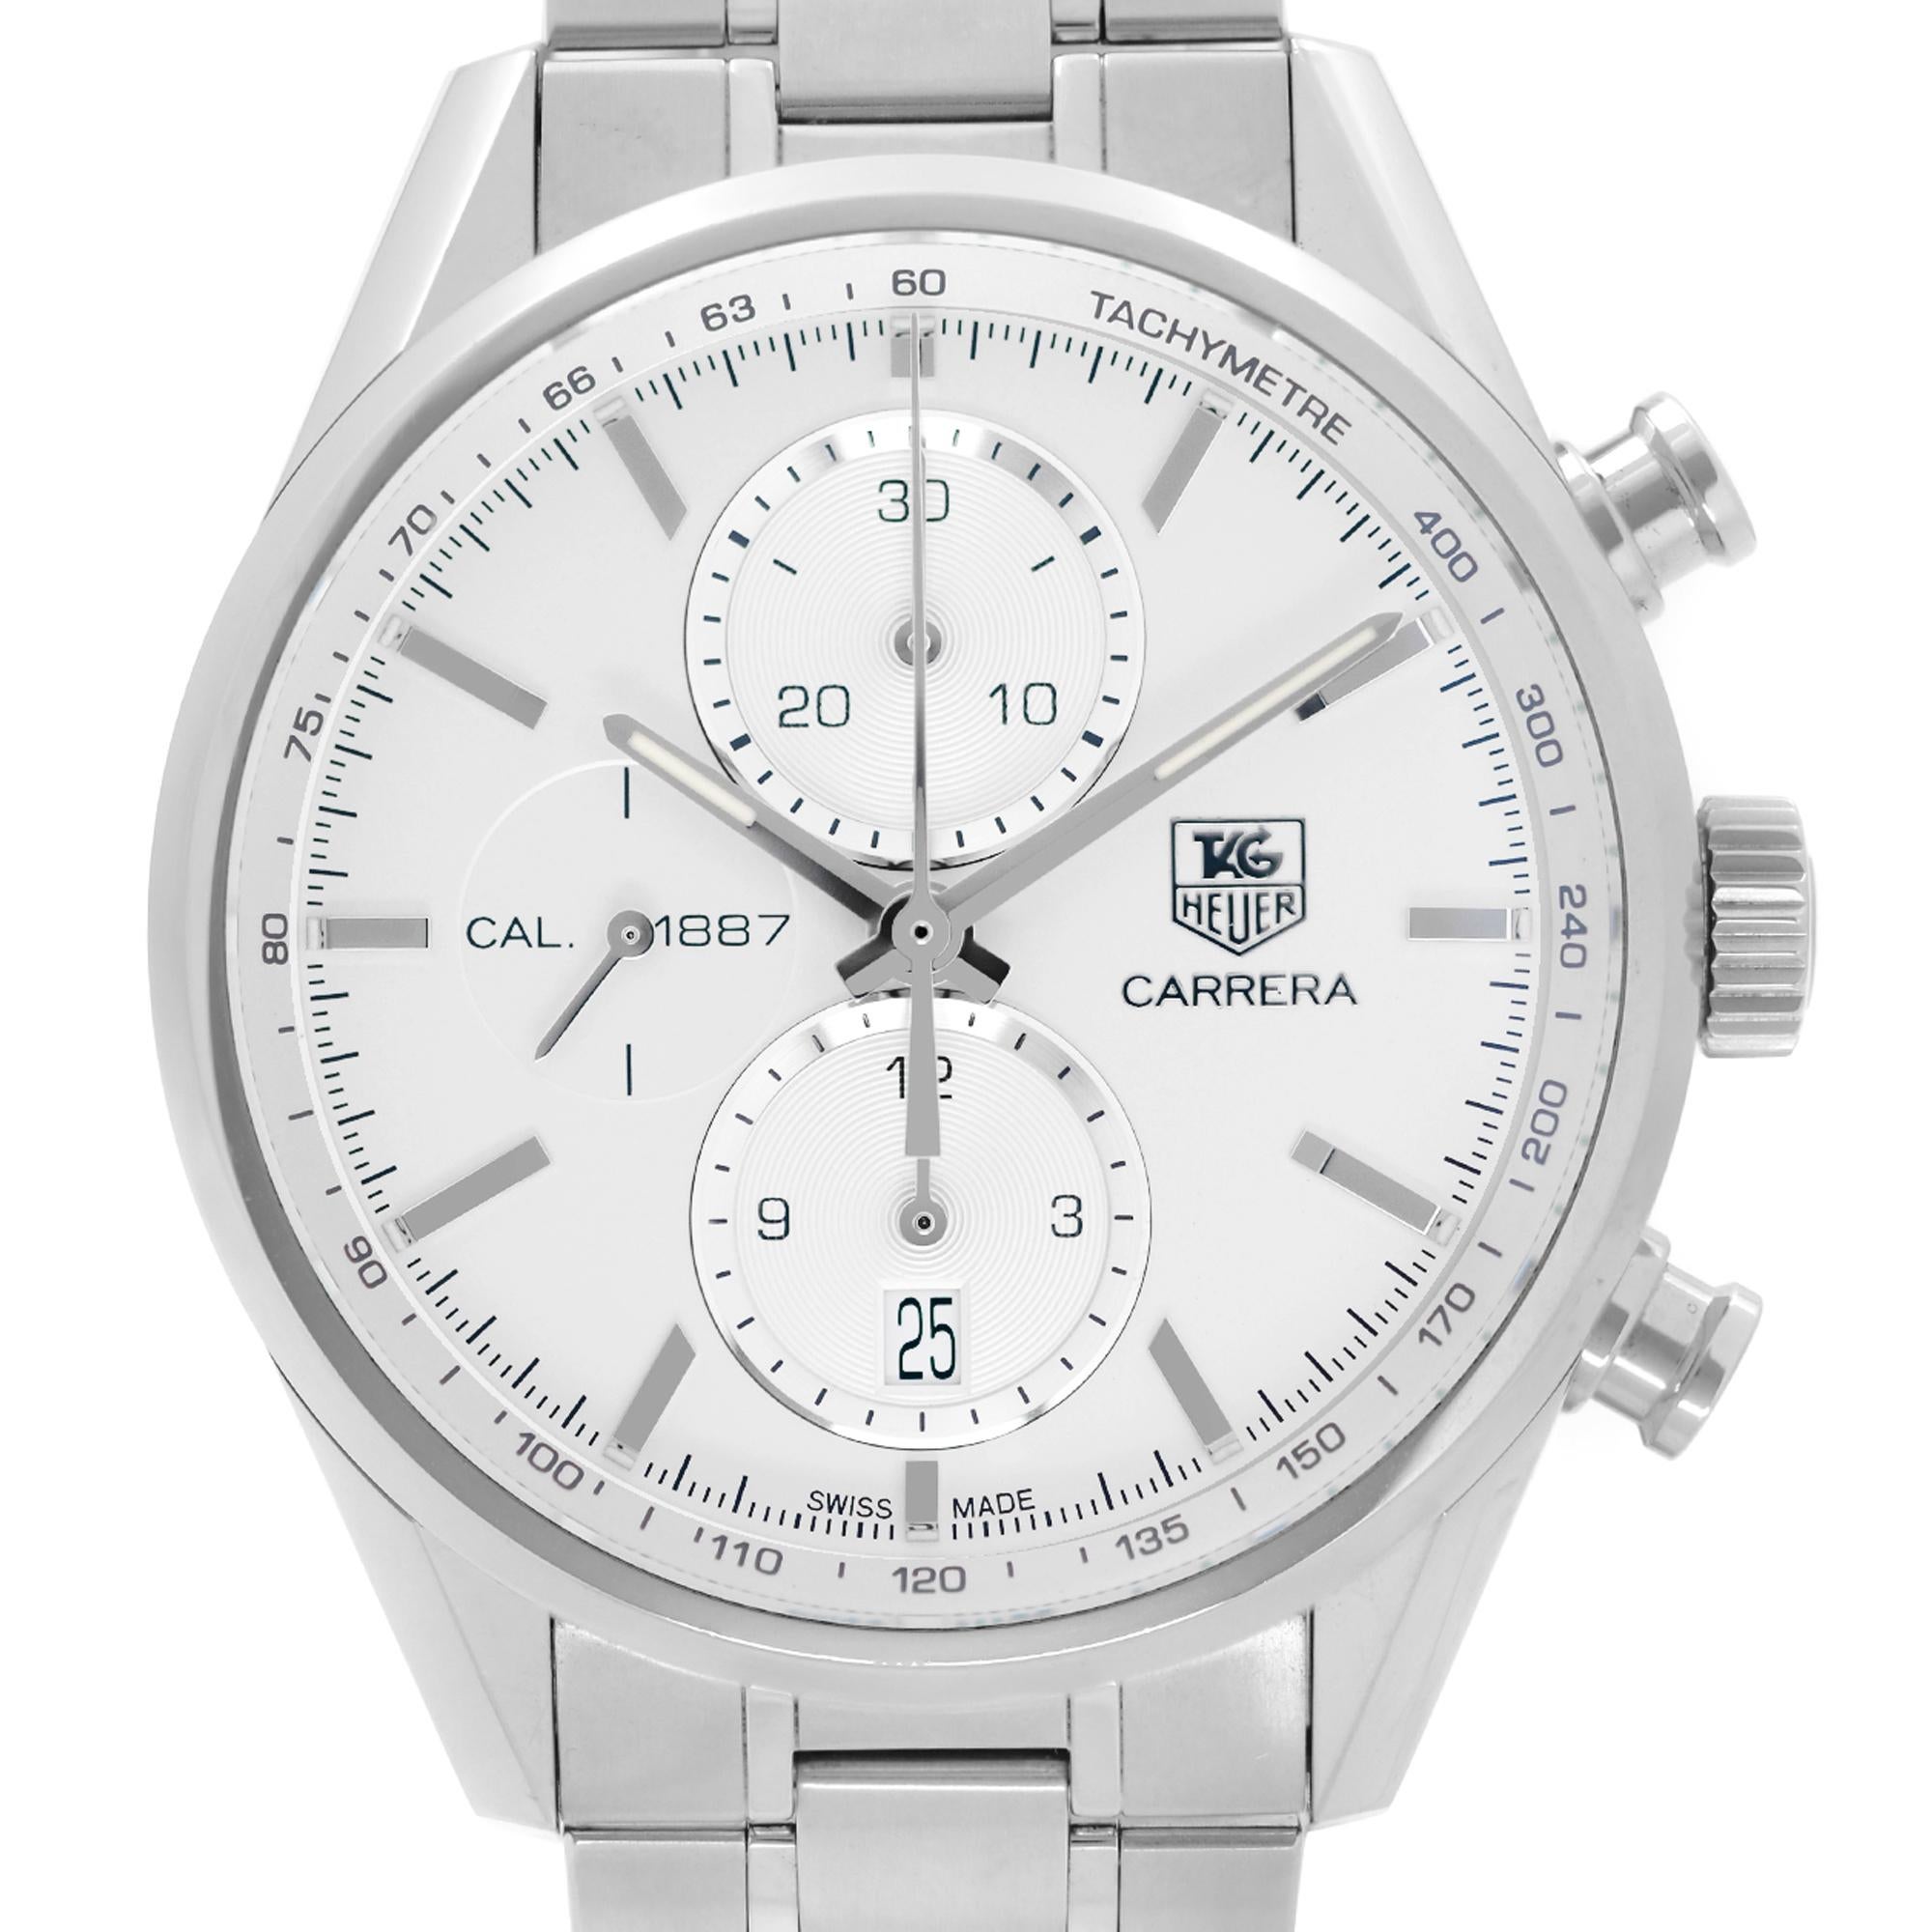 Pre Owned Tag Heuer Carrera Chronograph Steel Silver Dial Men's Watch CAR2111.BA0720. This Beautiful Timepiece Features: Stainless Steel Case & Bracelet, Fixed Smooth Stainless Steel Bezel, Silver Dial with Luminous Silver-Tone Hands and Index Hour